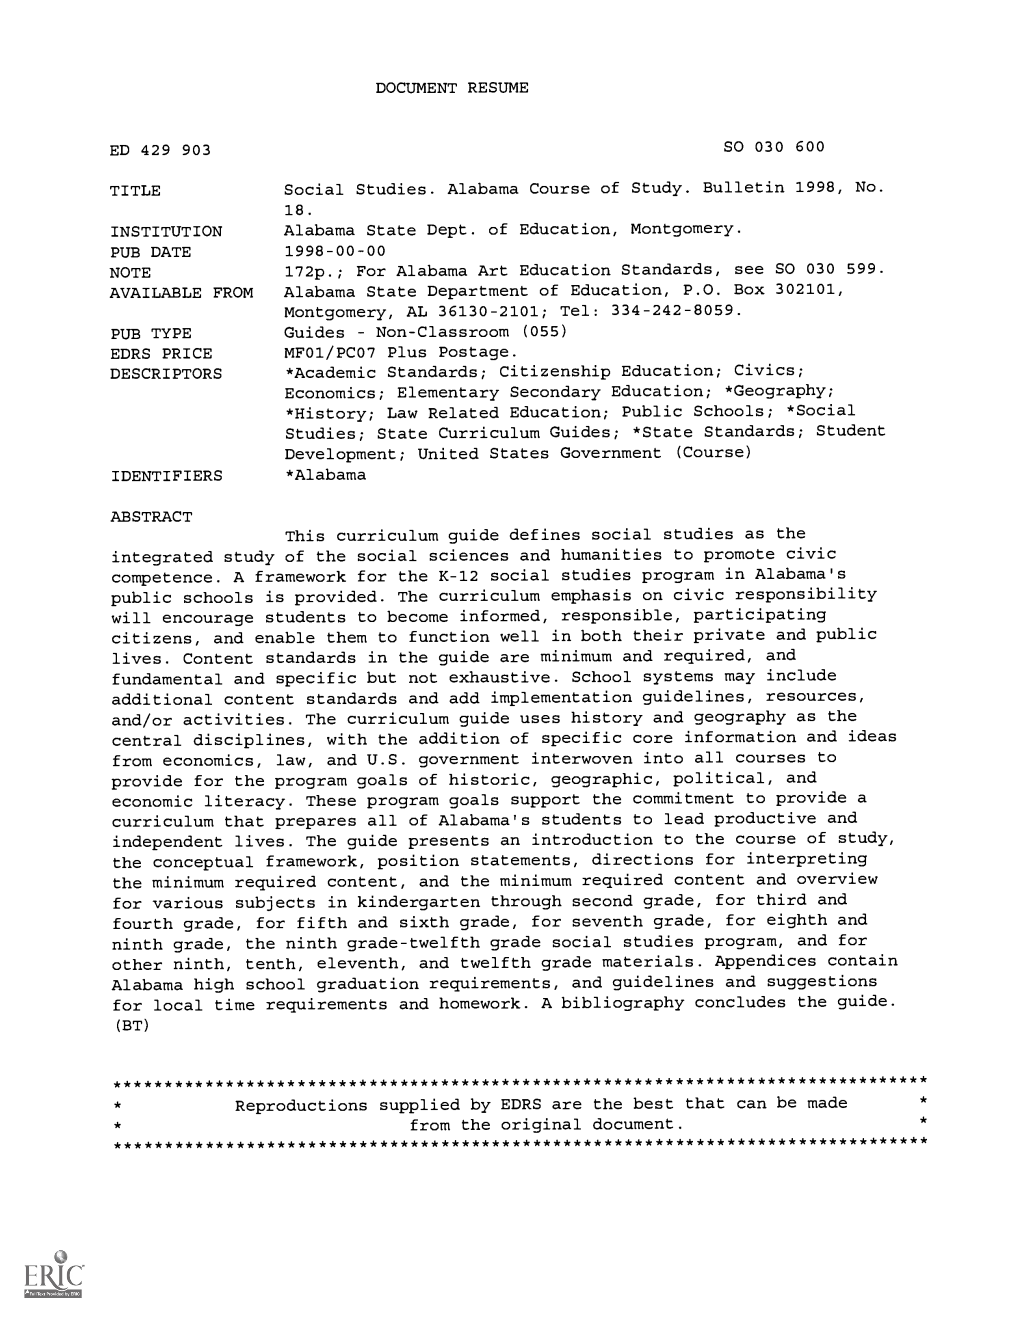 INSTITUTION AVAILABLE from DESCRIPTORS ABSTRACT Social Studies. Alabama Course of Study. Bulletin 1998, No. Alabama State Dept